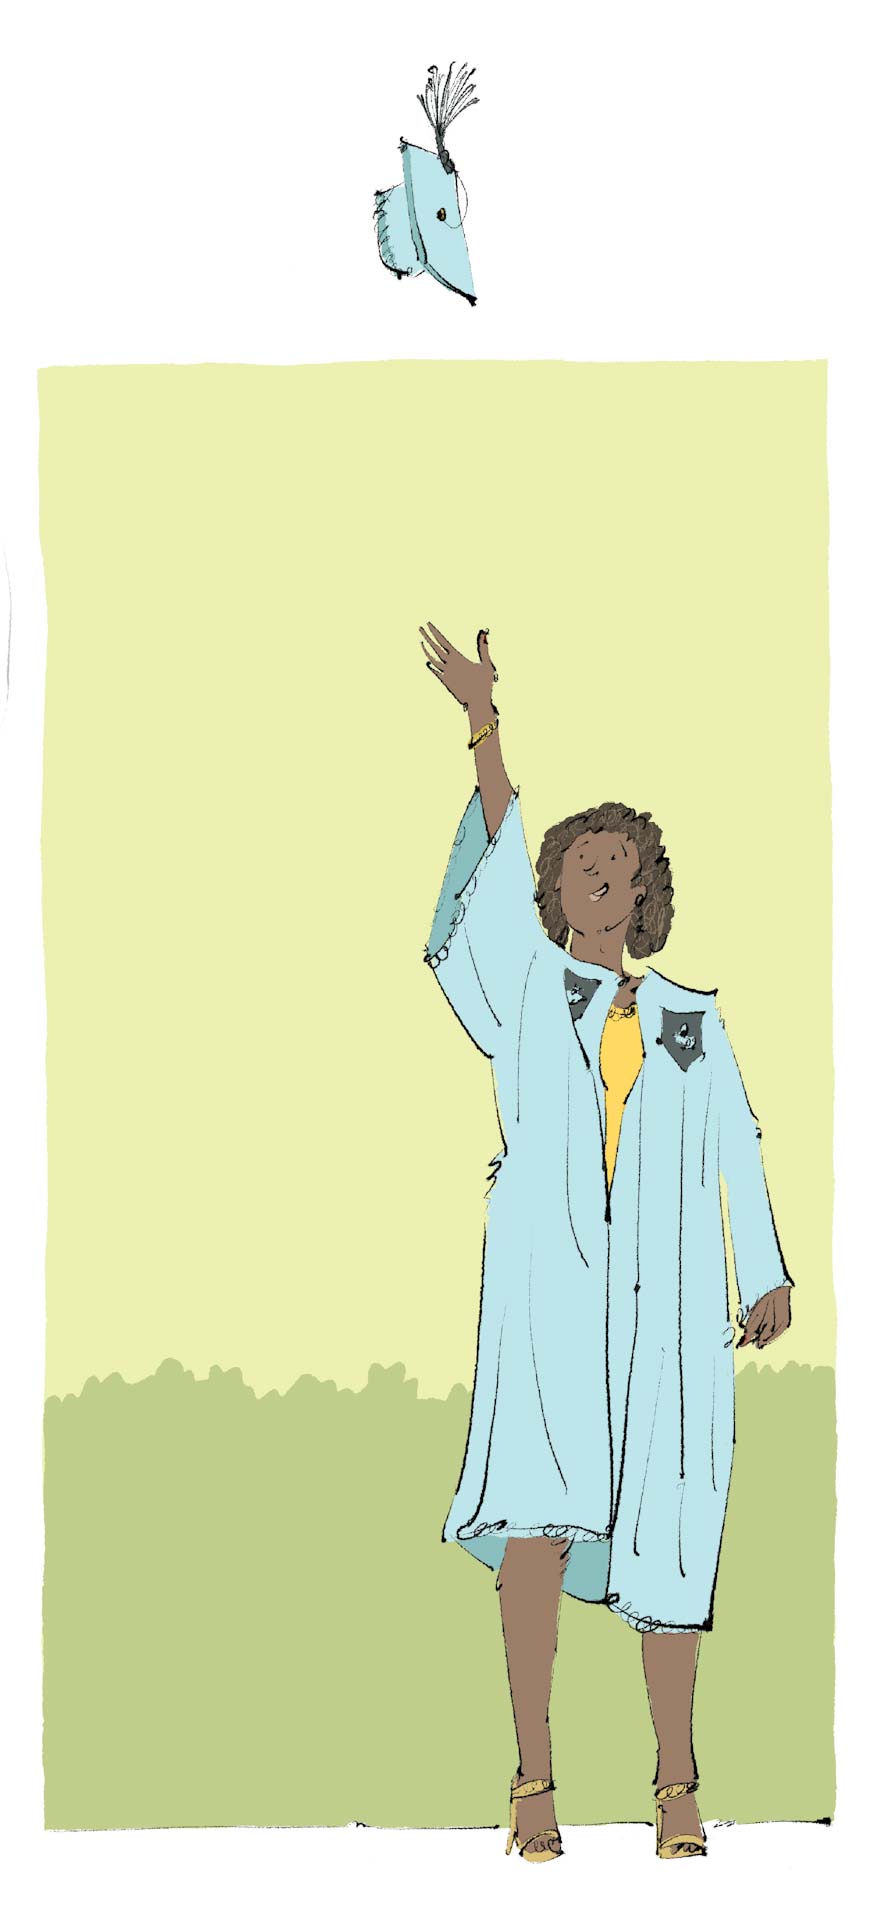 A student wearing graduation regalia tosses her cap in the air, illustration